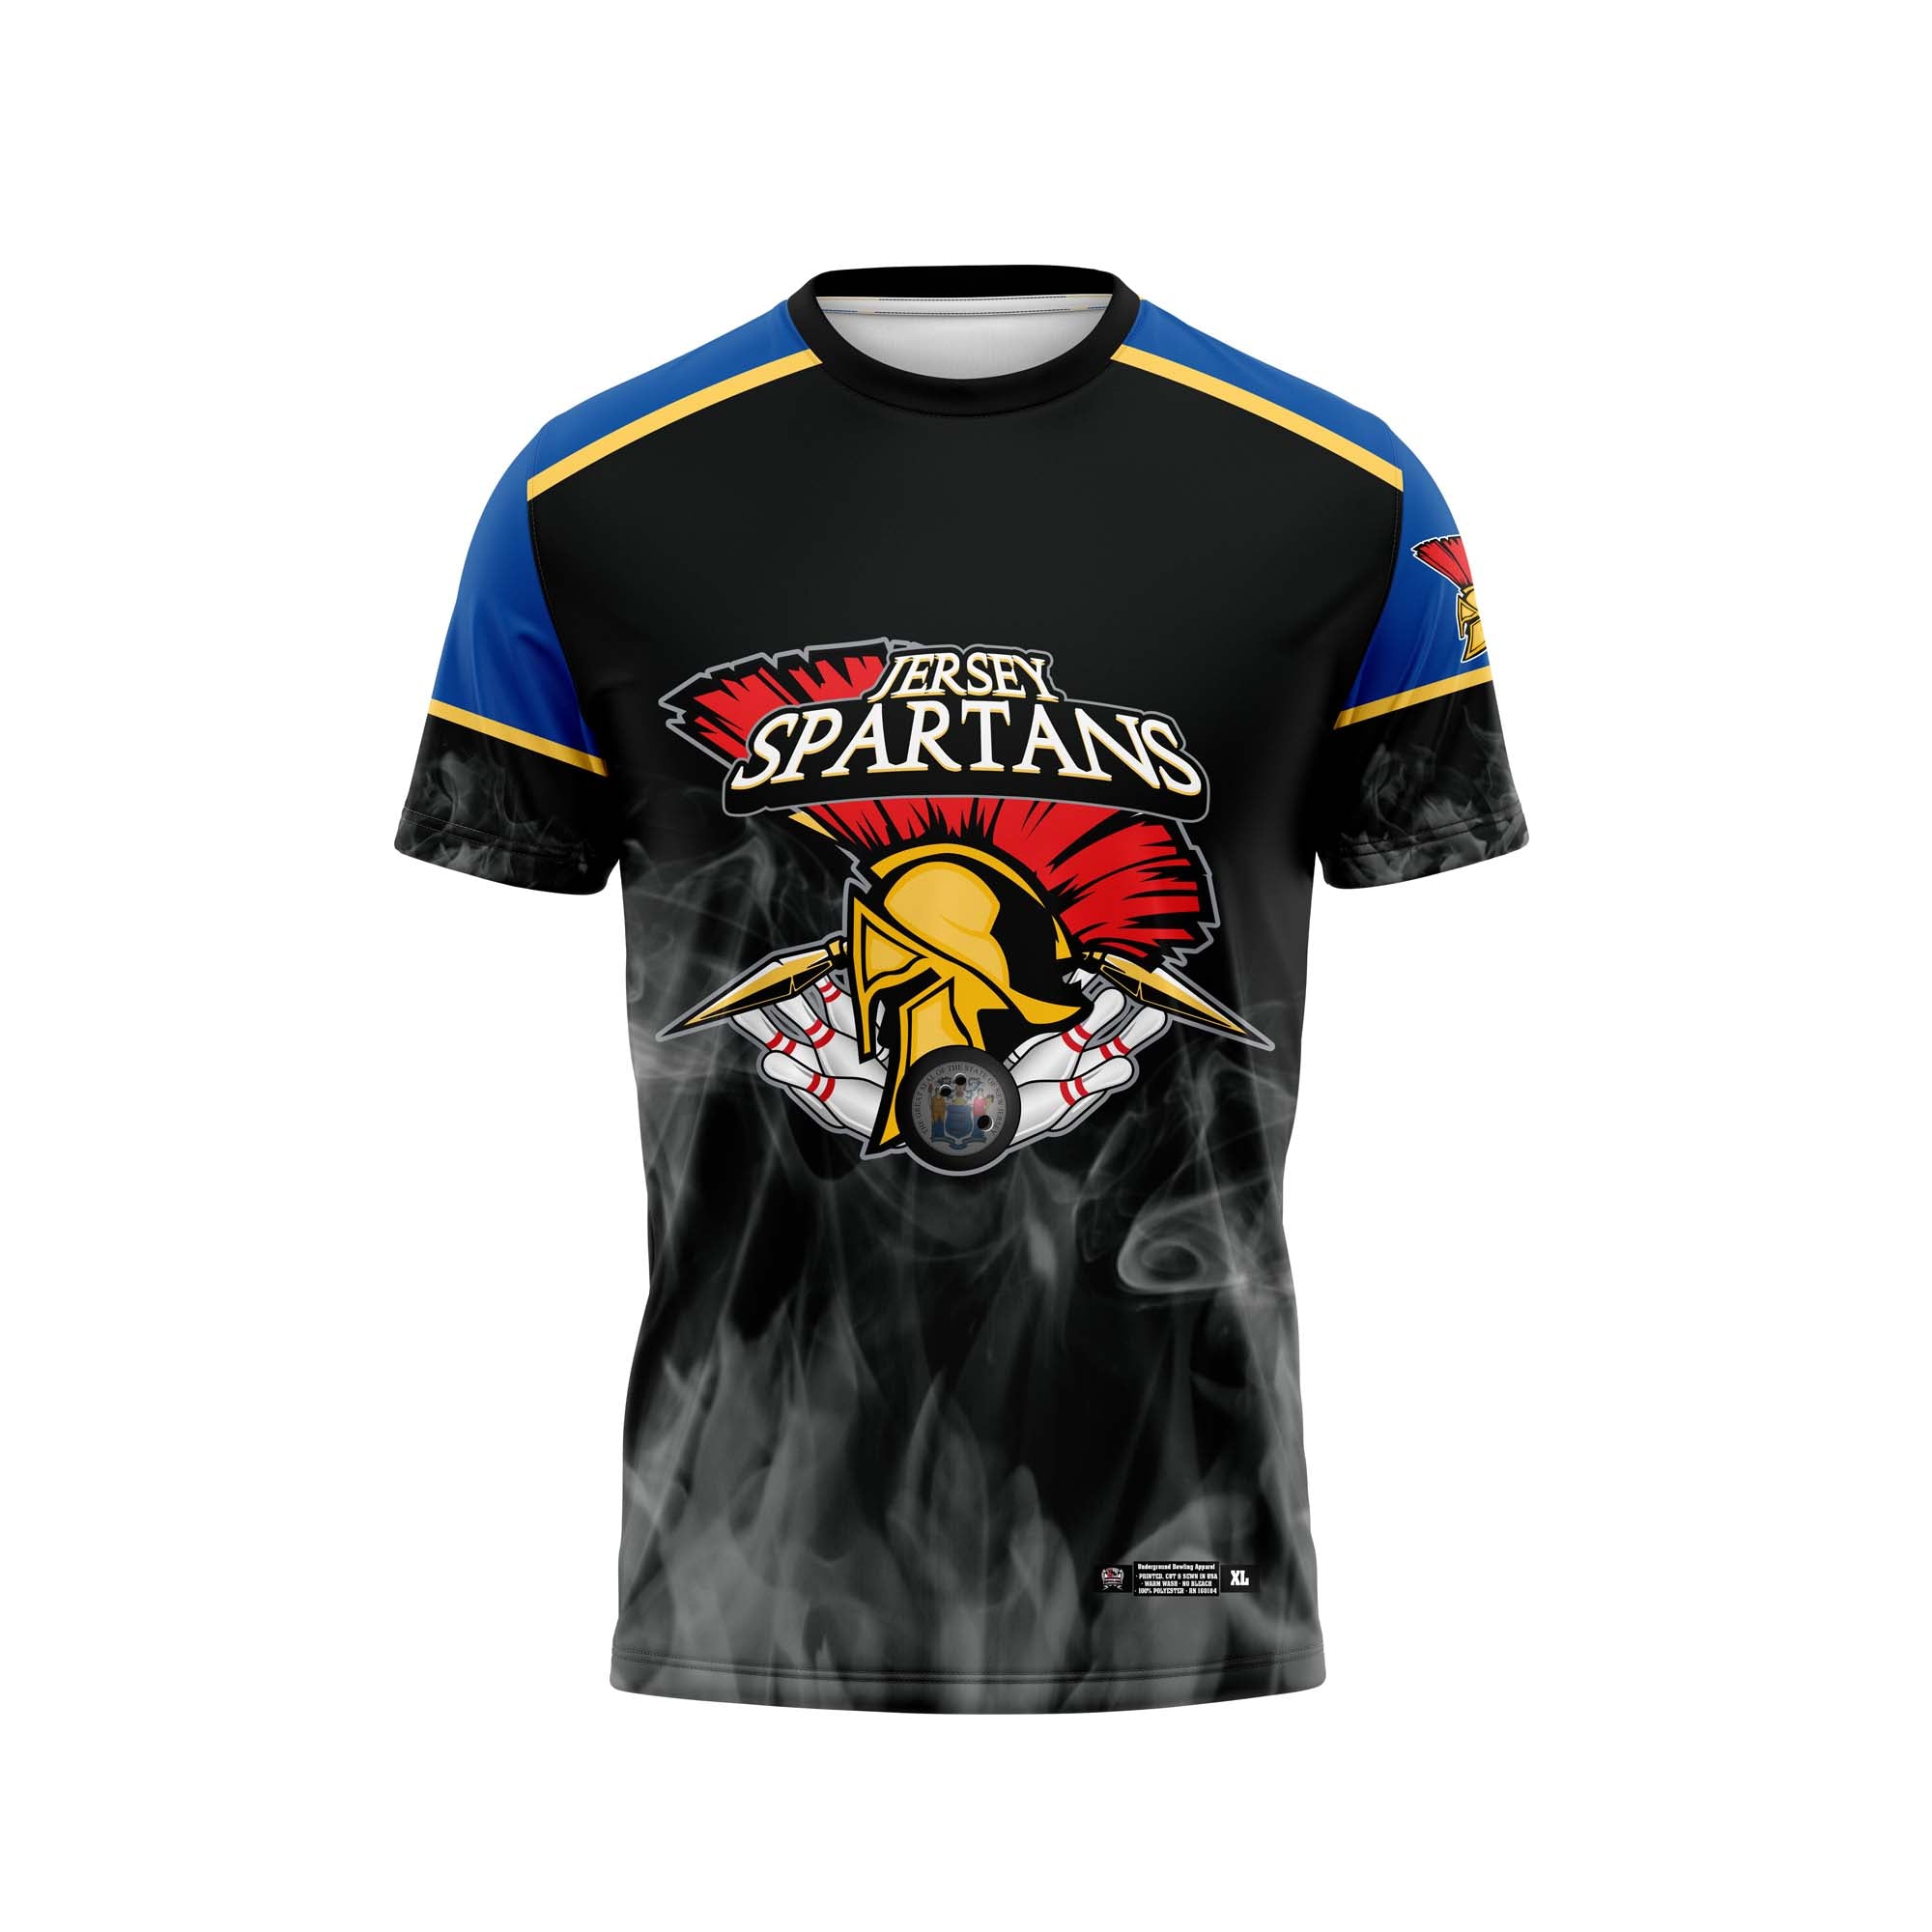 Jersey Spartans Home Jersey